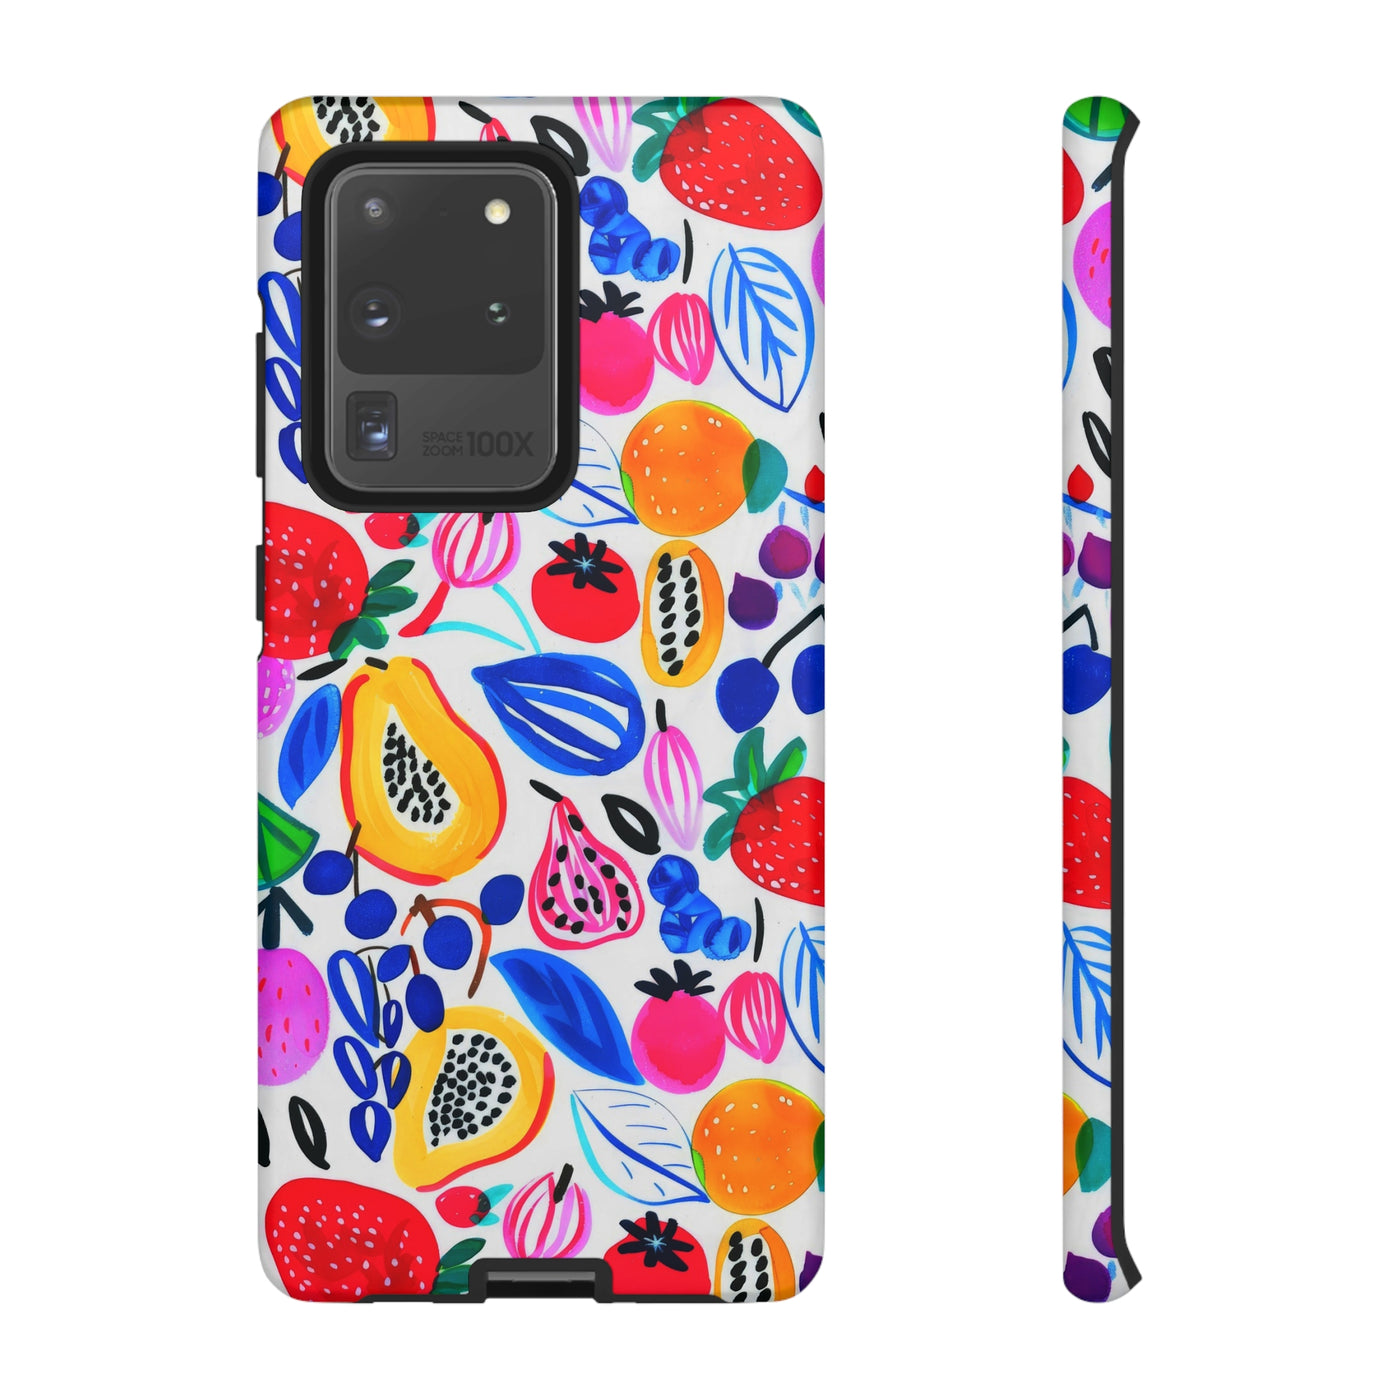 Cute Samsung Phone Case | Aesthetic Samsung Phone Case | Galaxy S23, S22, S21, S20 | Summer Fruit Cocktail, Protective Phone Case